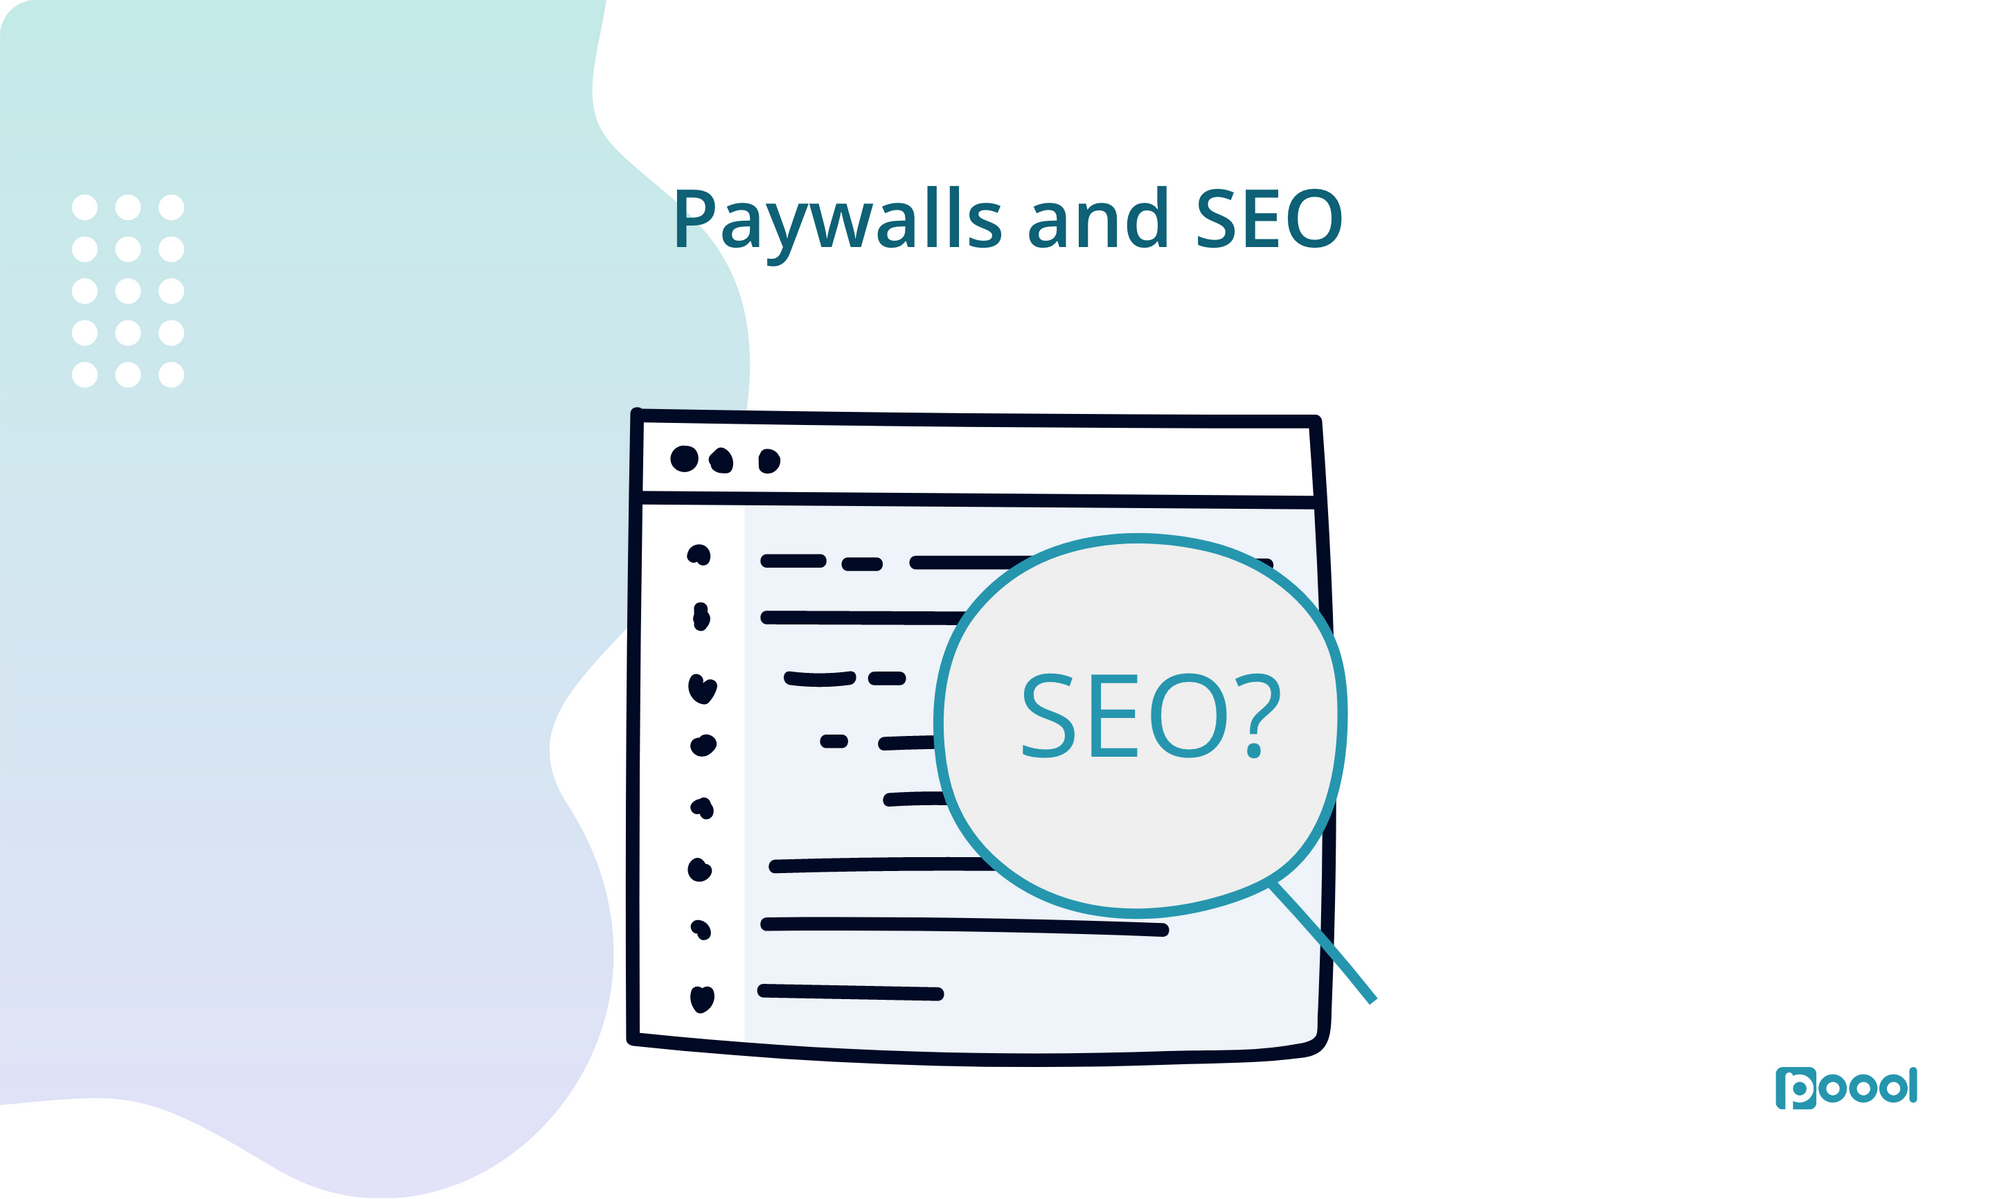 White Paper: How Can I Limit the Impact of a Wall on SEO?